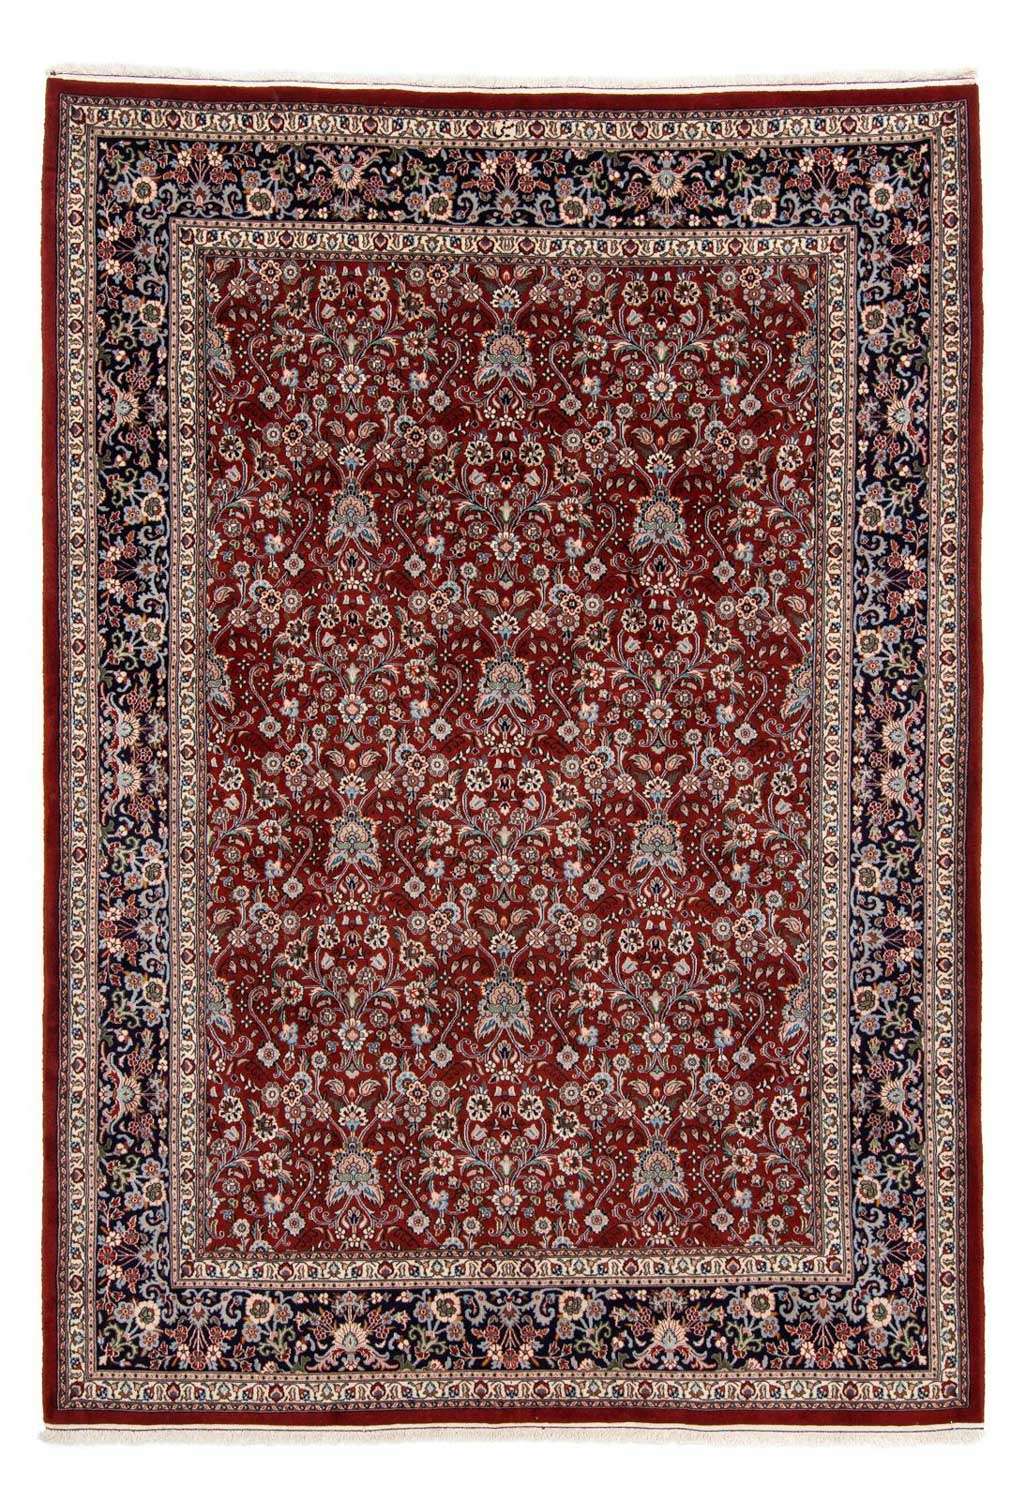 Perser Rug - Classic - 292 x 205 cm - red